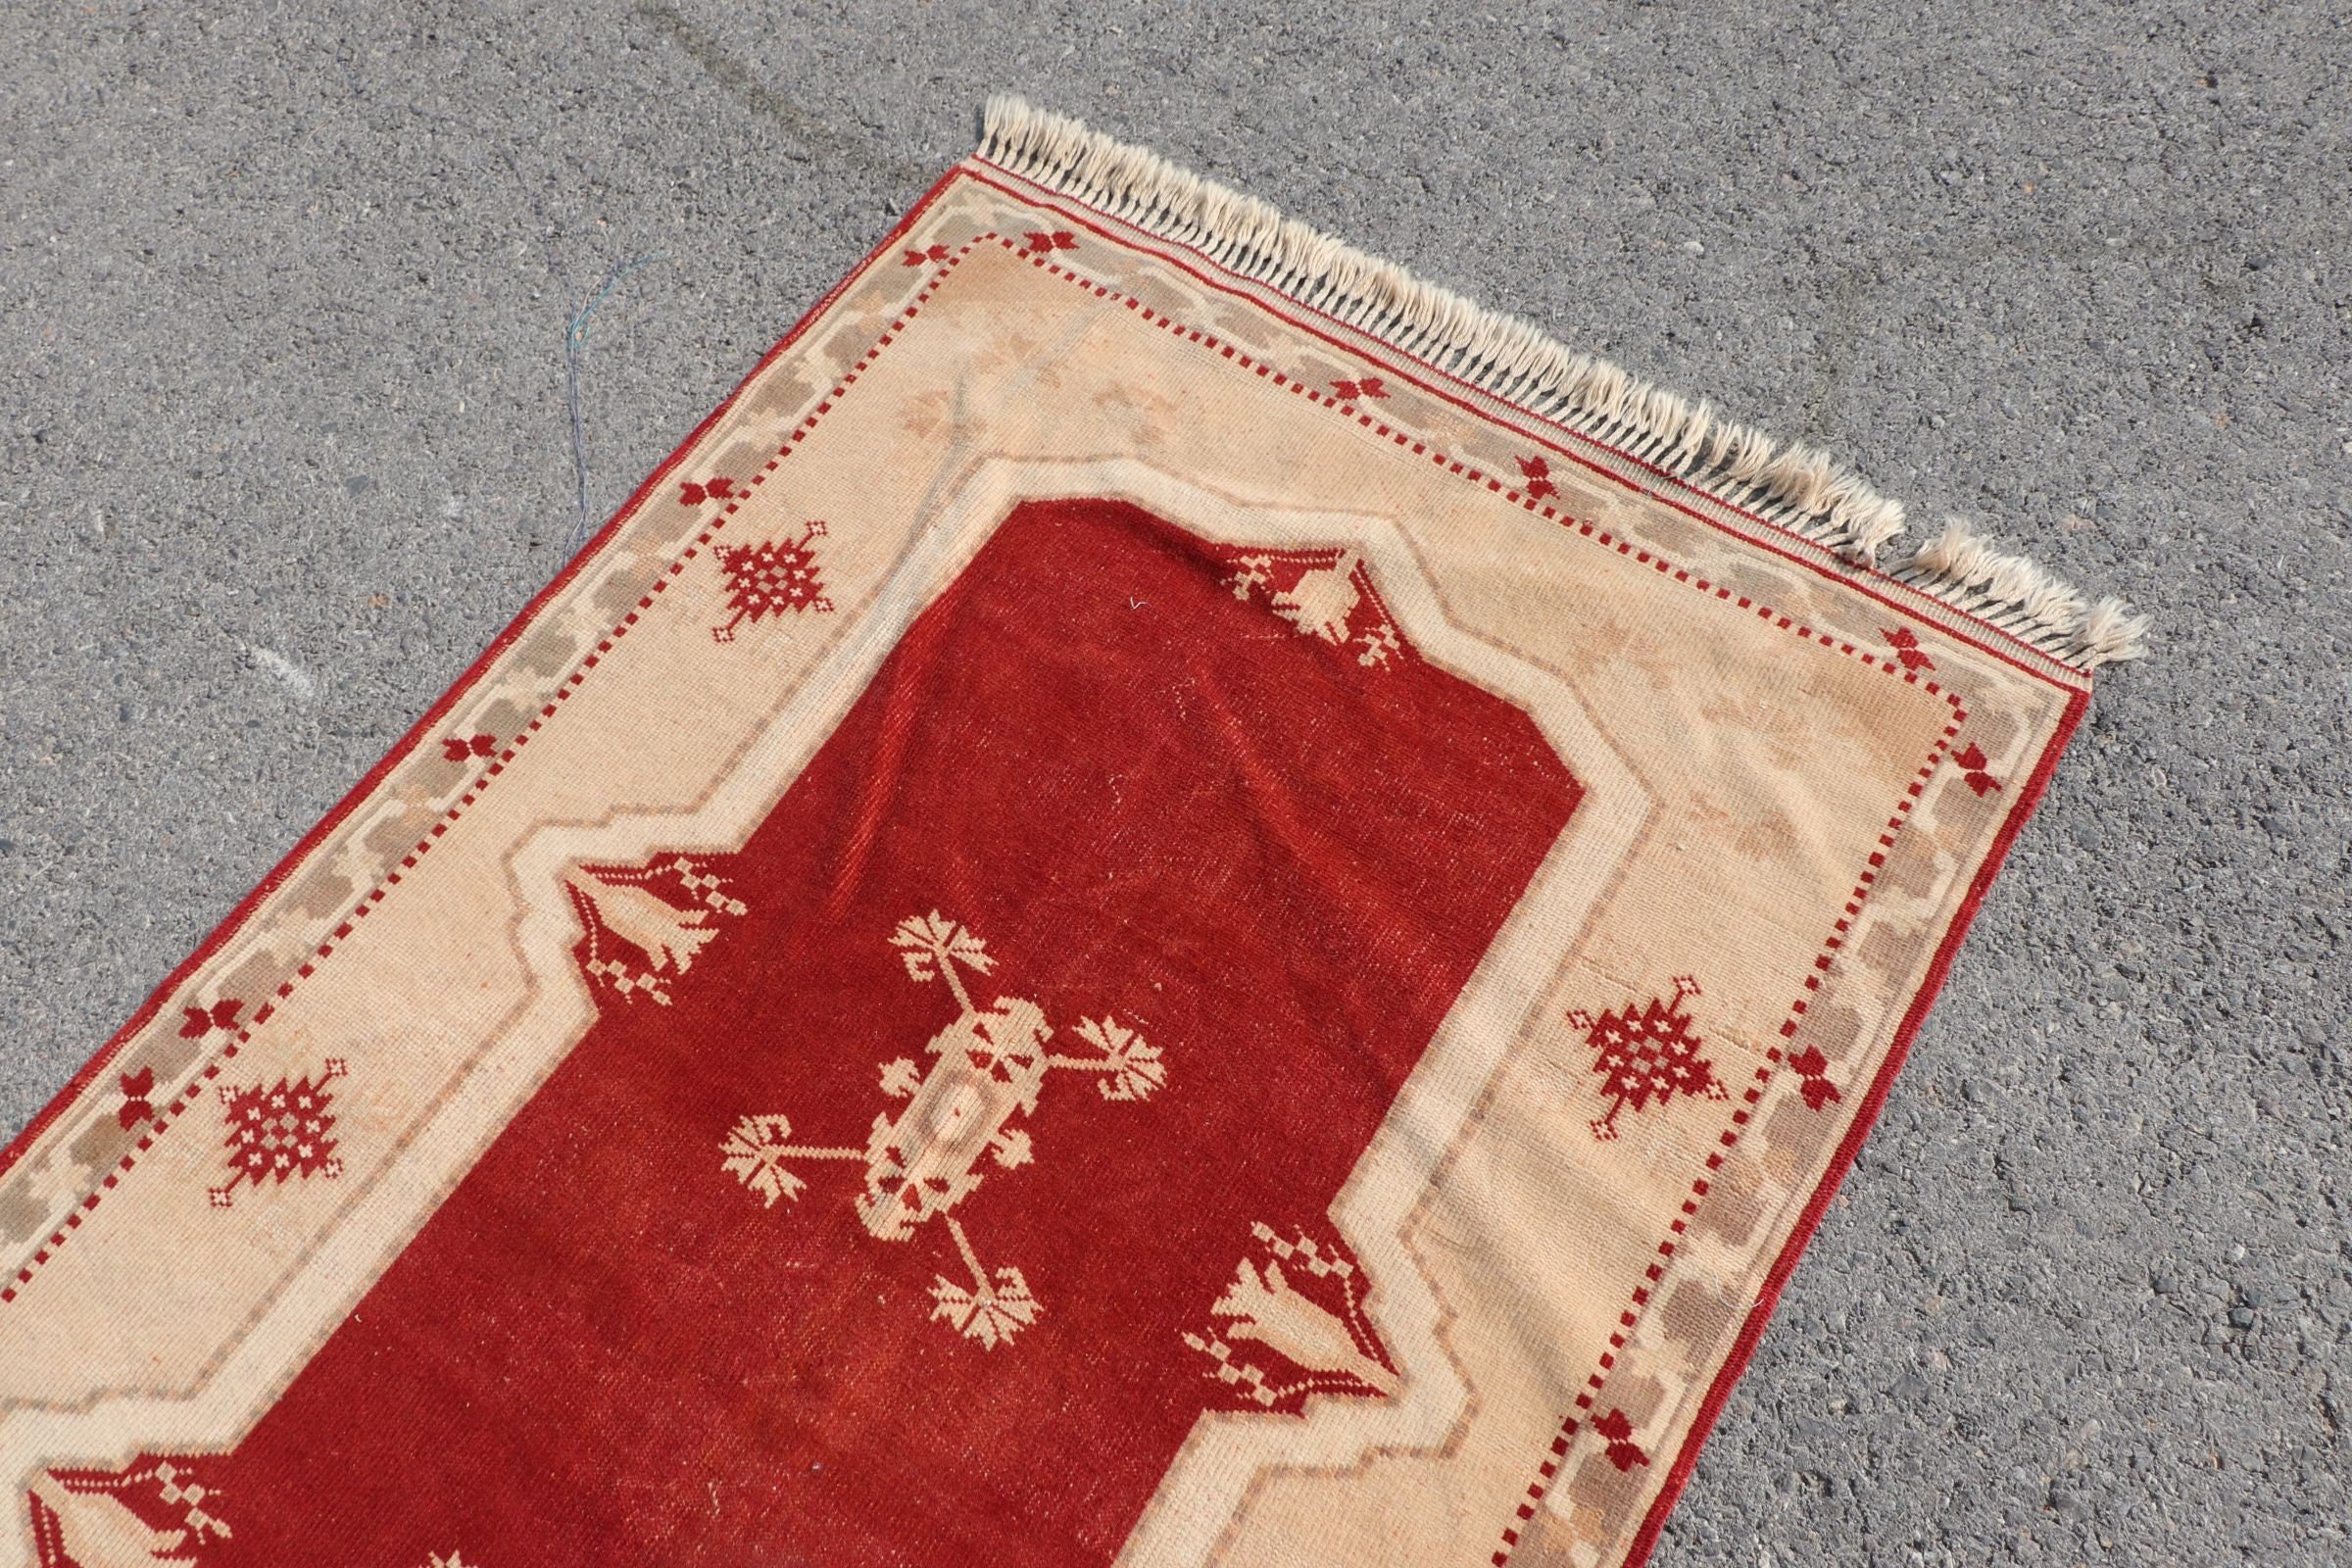 Kitchen Rug, 3.3x6 ft Accent Rugs, Antique Rug, Rugs for Kitchen, Turkish Rugs, Bedroom Rug, Vintage Rug, Red Home Decor Rug, Retro Rugs